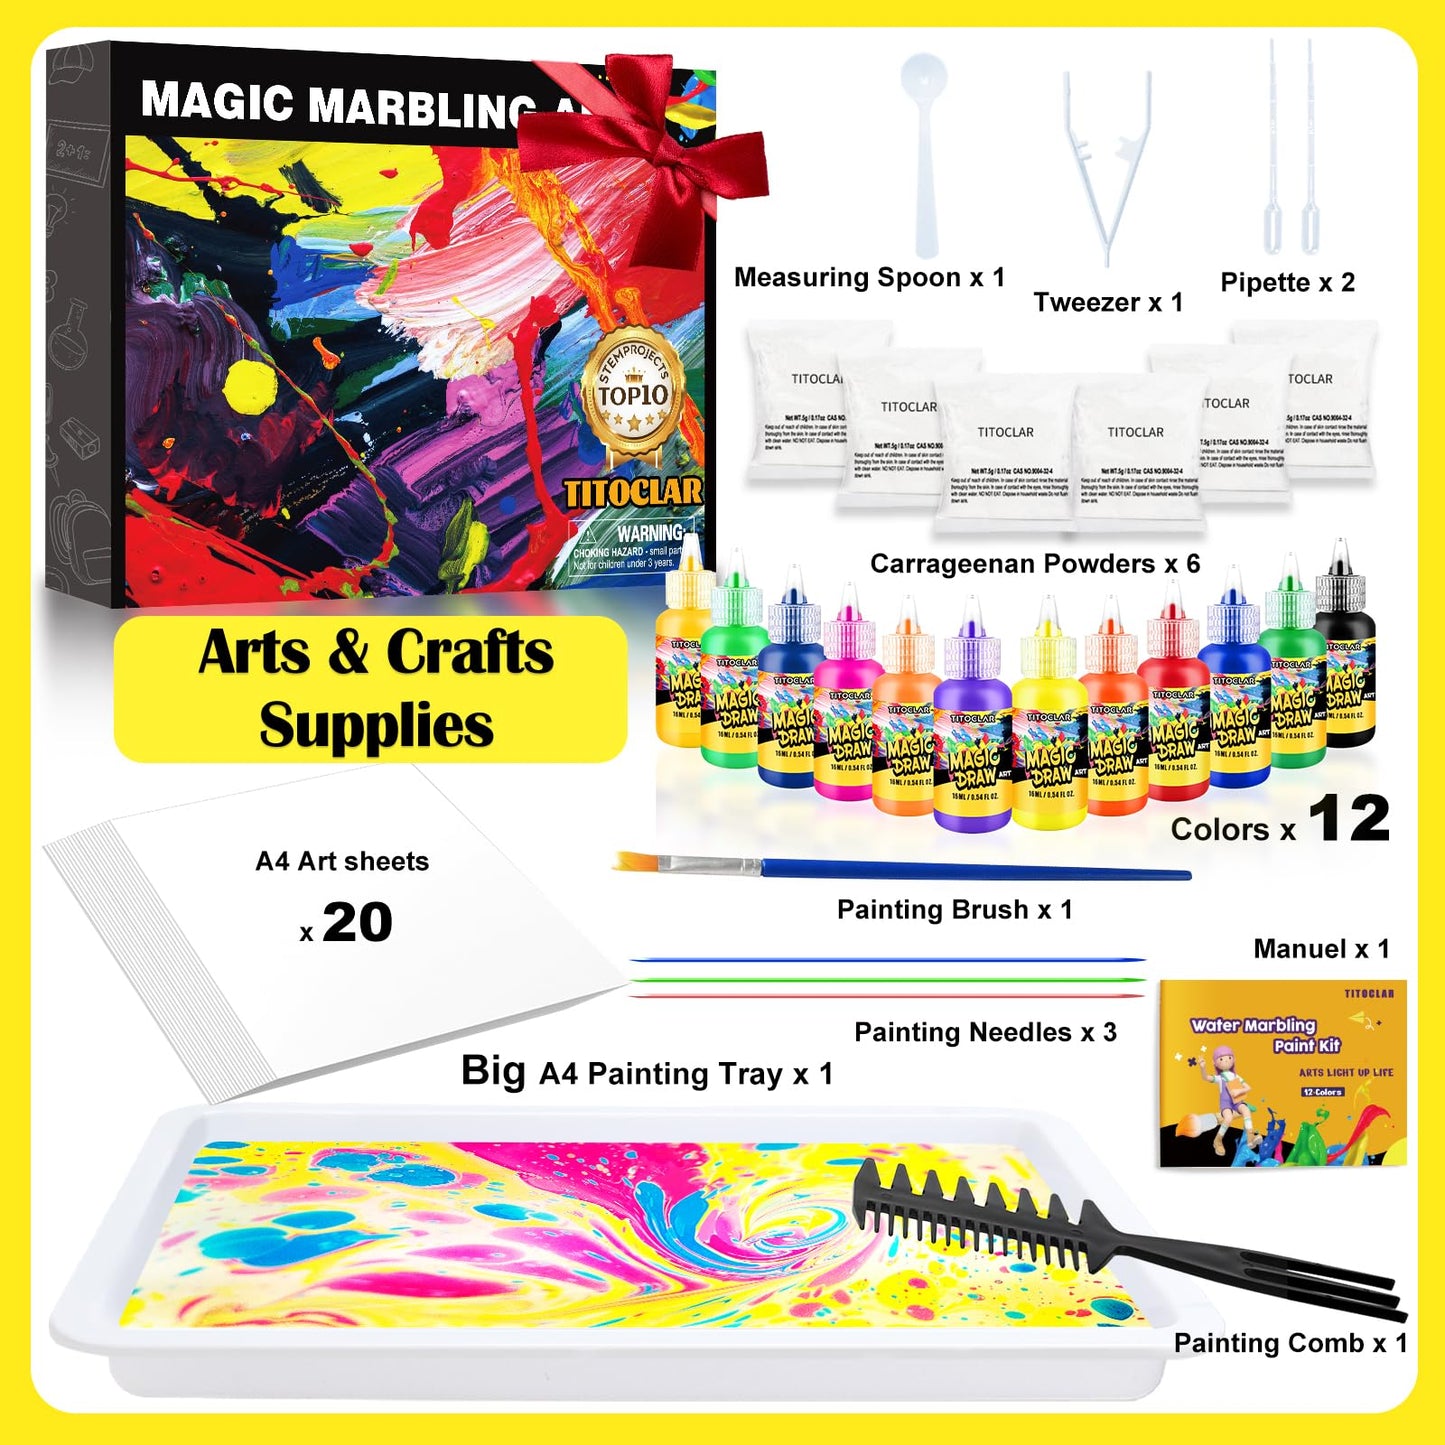 Arts & Crafts For Kids Ages 8-12 6-8,Water Marbling Paint Kit, Art Supplies for Kids,Toys For Girls Boys 4 5 6 7 8 9 10 11 12 Year Old